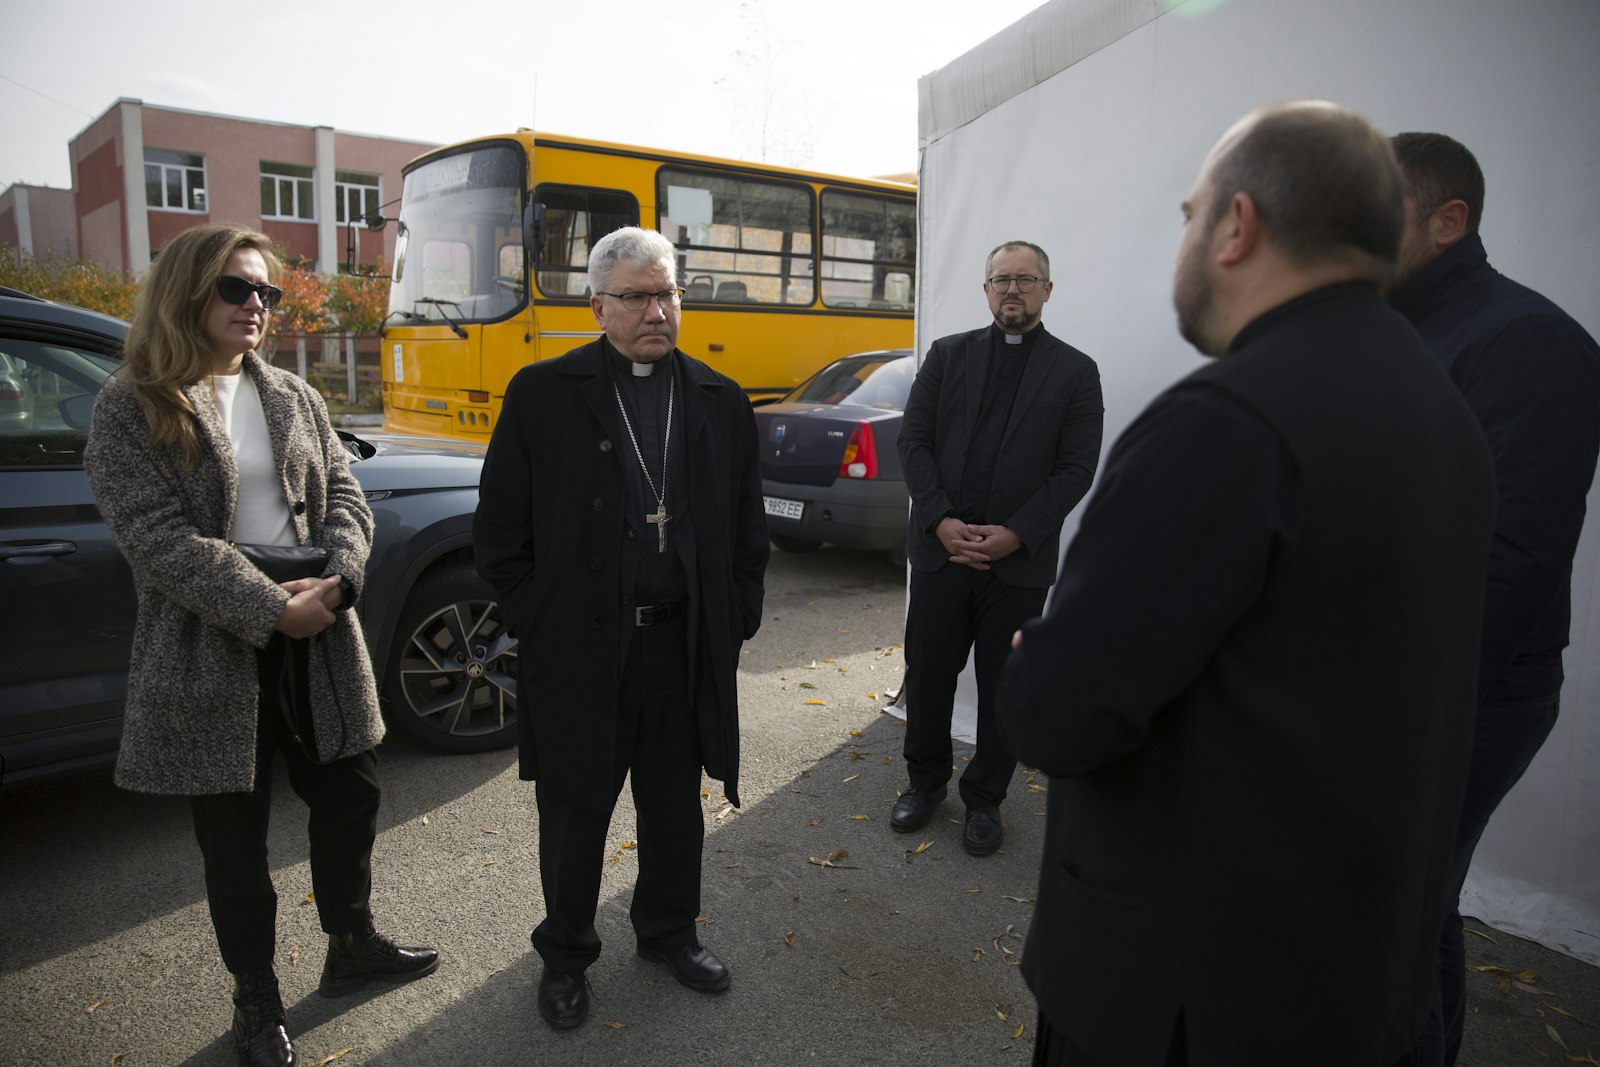 Bishop Monforton speaks with Ukrainian clergy and aid workers outside a makeshift shelter providing heat, internet access and essentials to displaced families in Kiev, Ukraine.